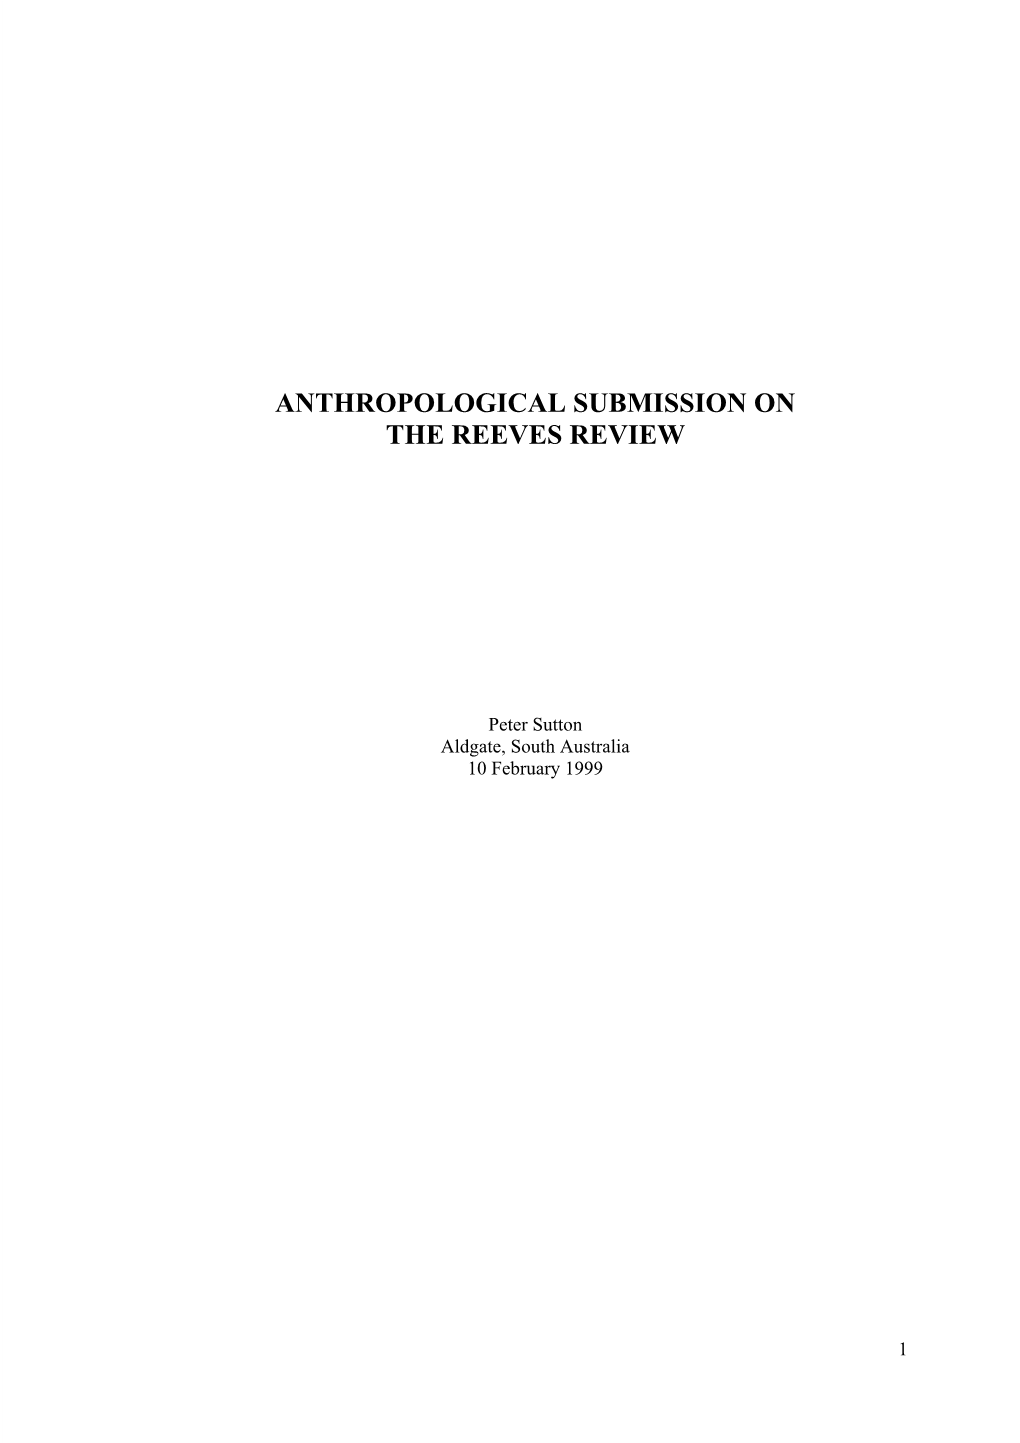 Anthropological Submission on the Reeves Review